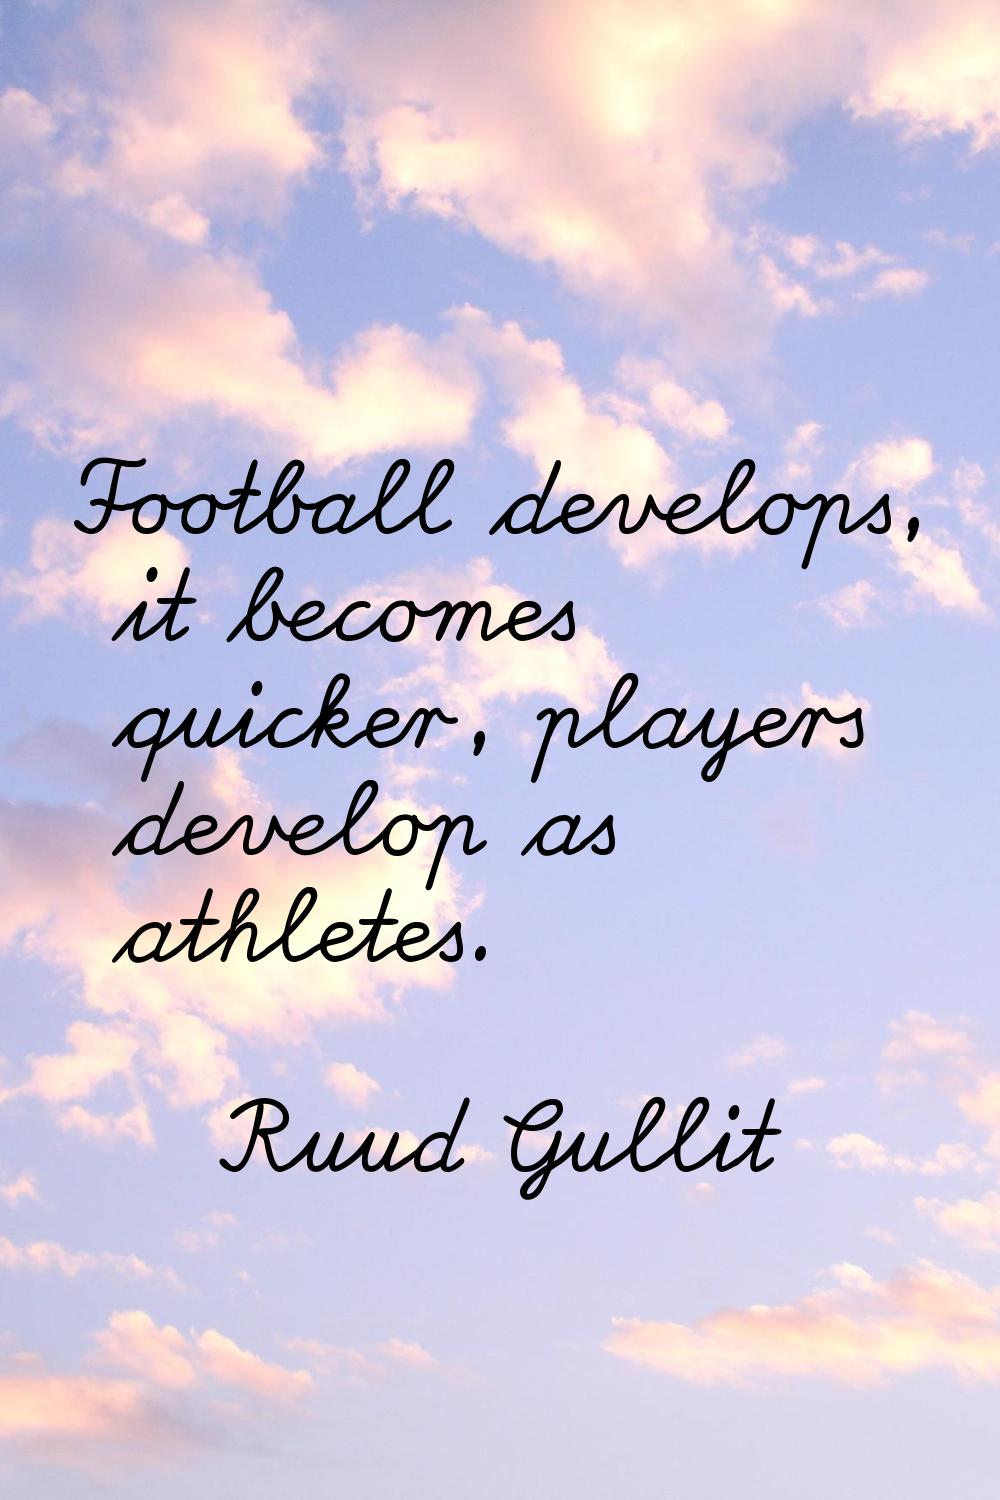 Football develops, it becomes quicker, players develop as athletes.